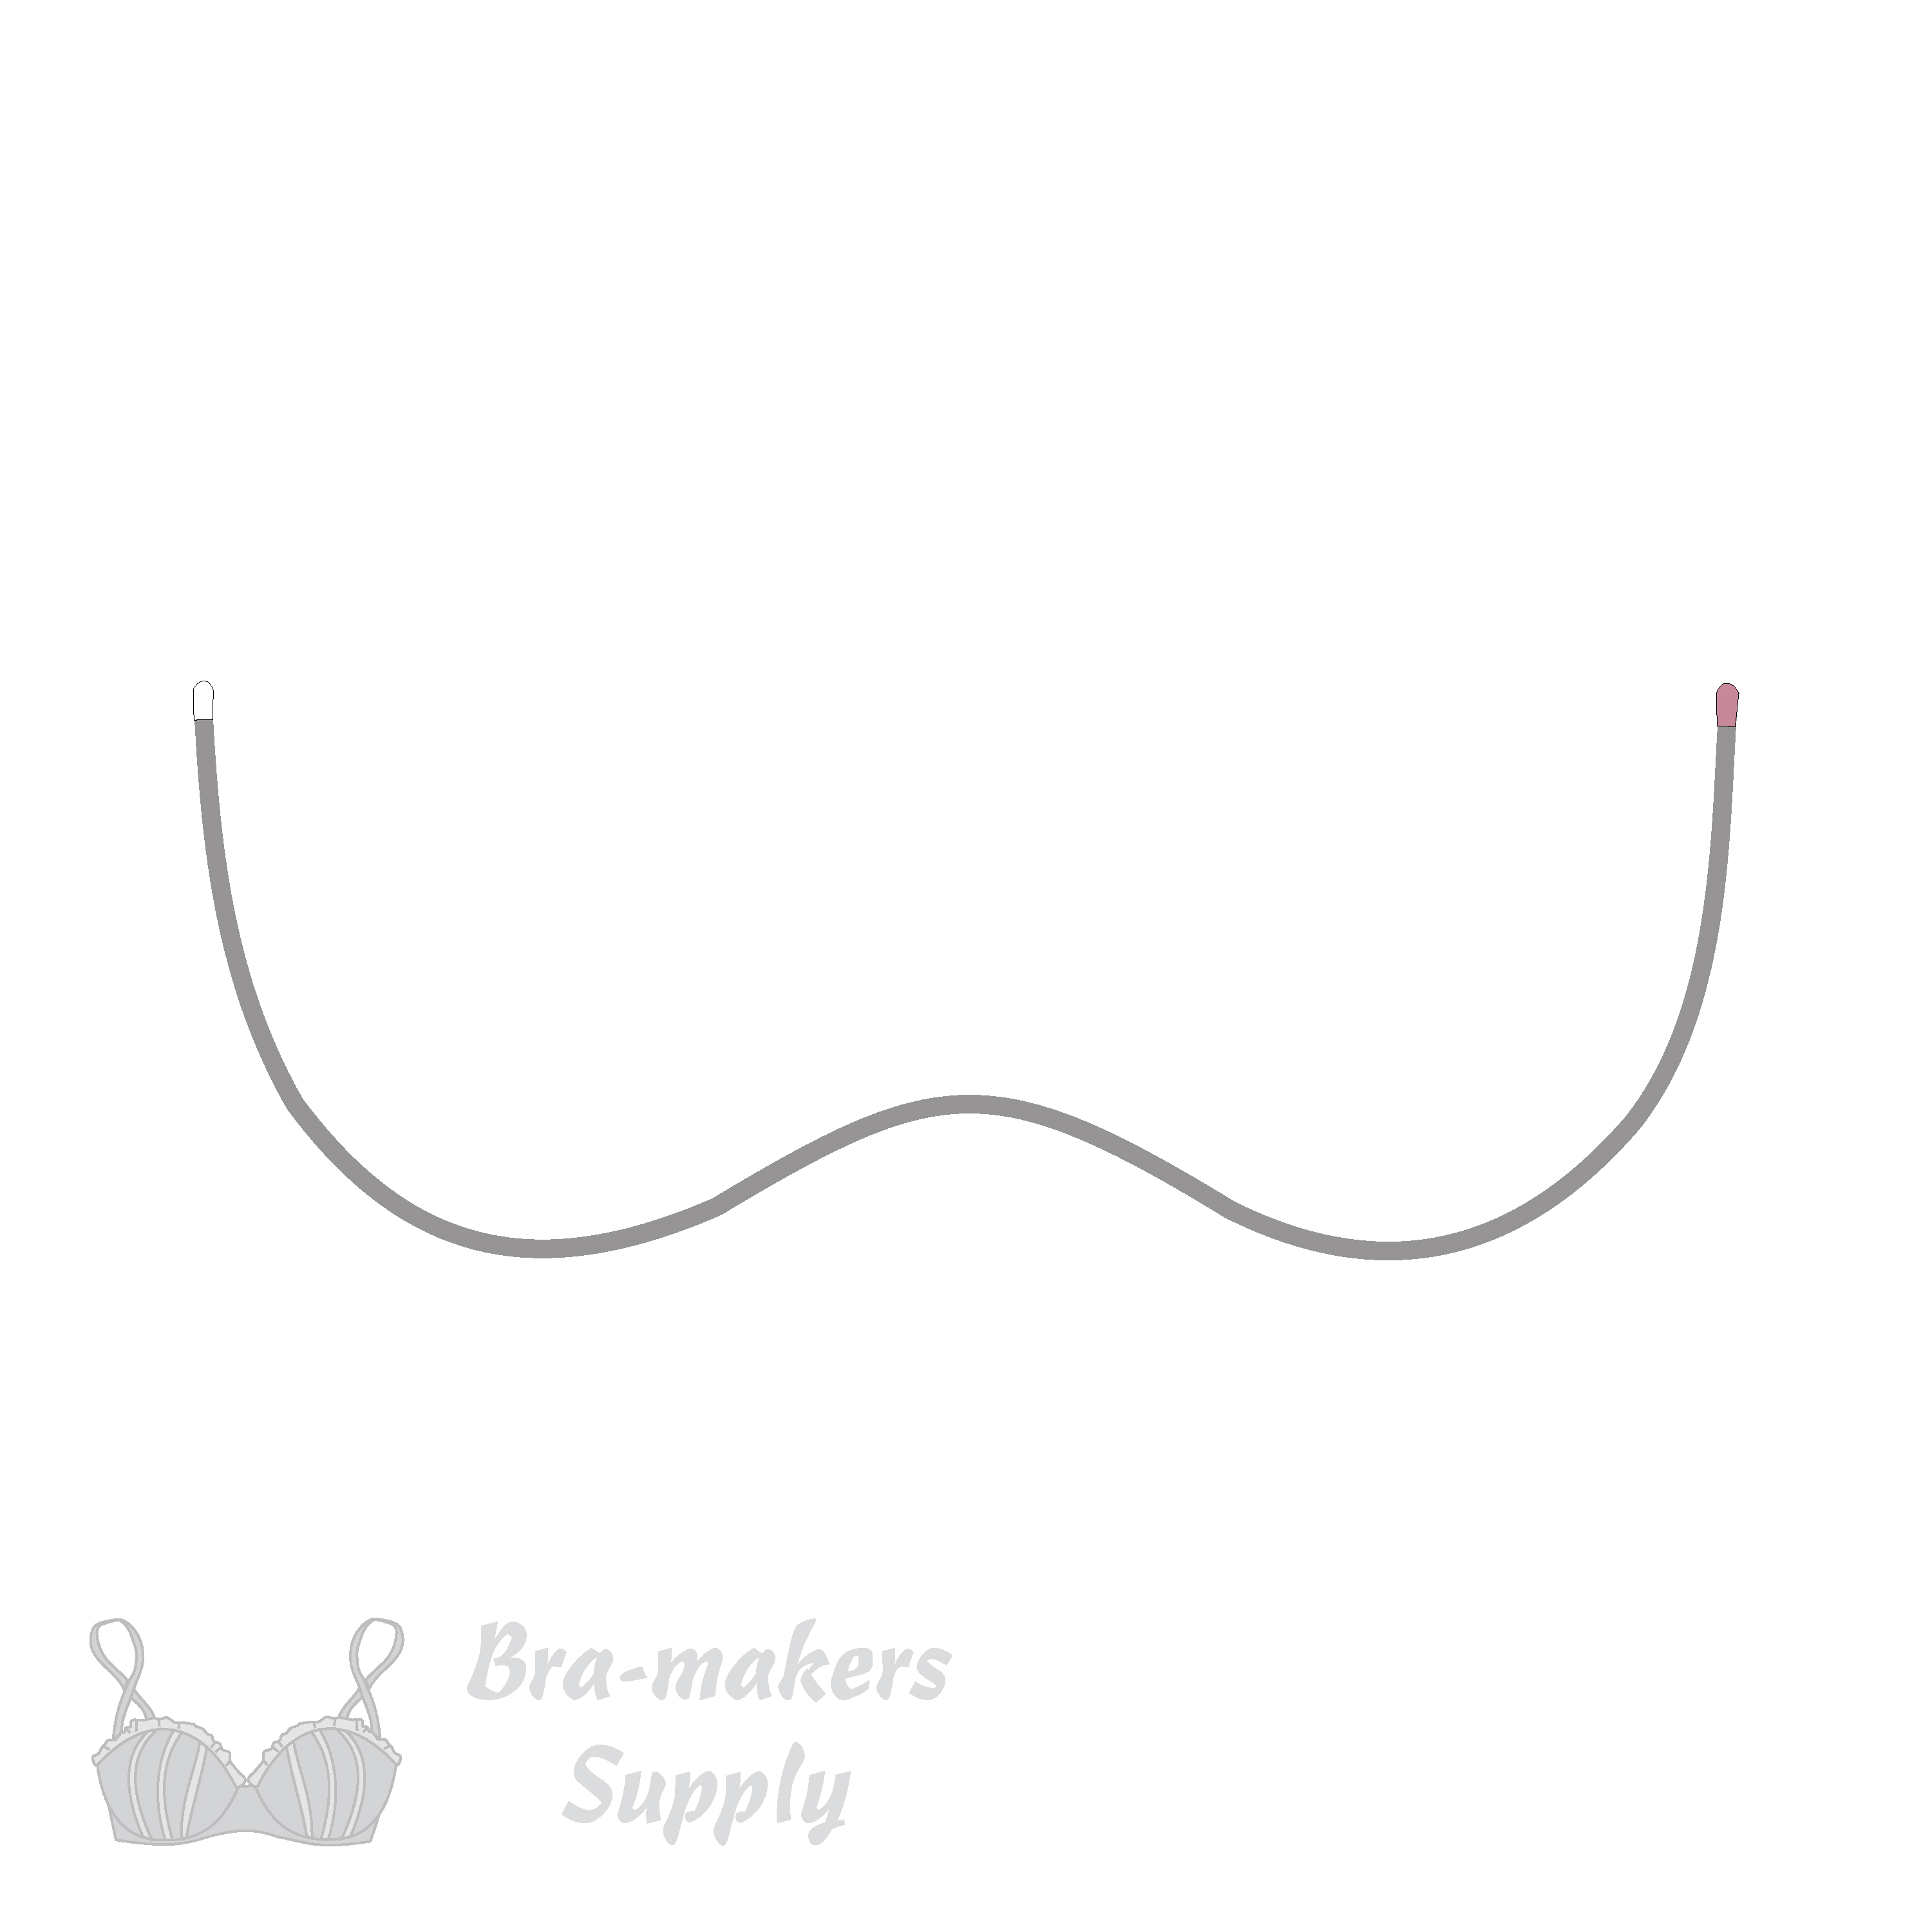 WCL - Continuous Low Uni-Wires Metal Uni-Wire - Bra-makers Supply the  leading global source for bra making and corset making supplies